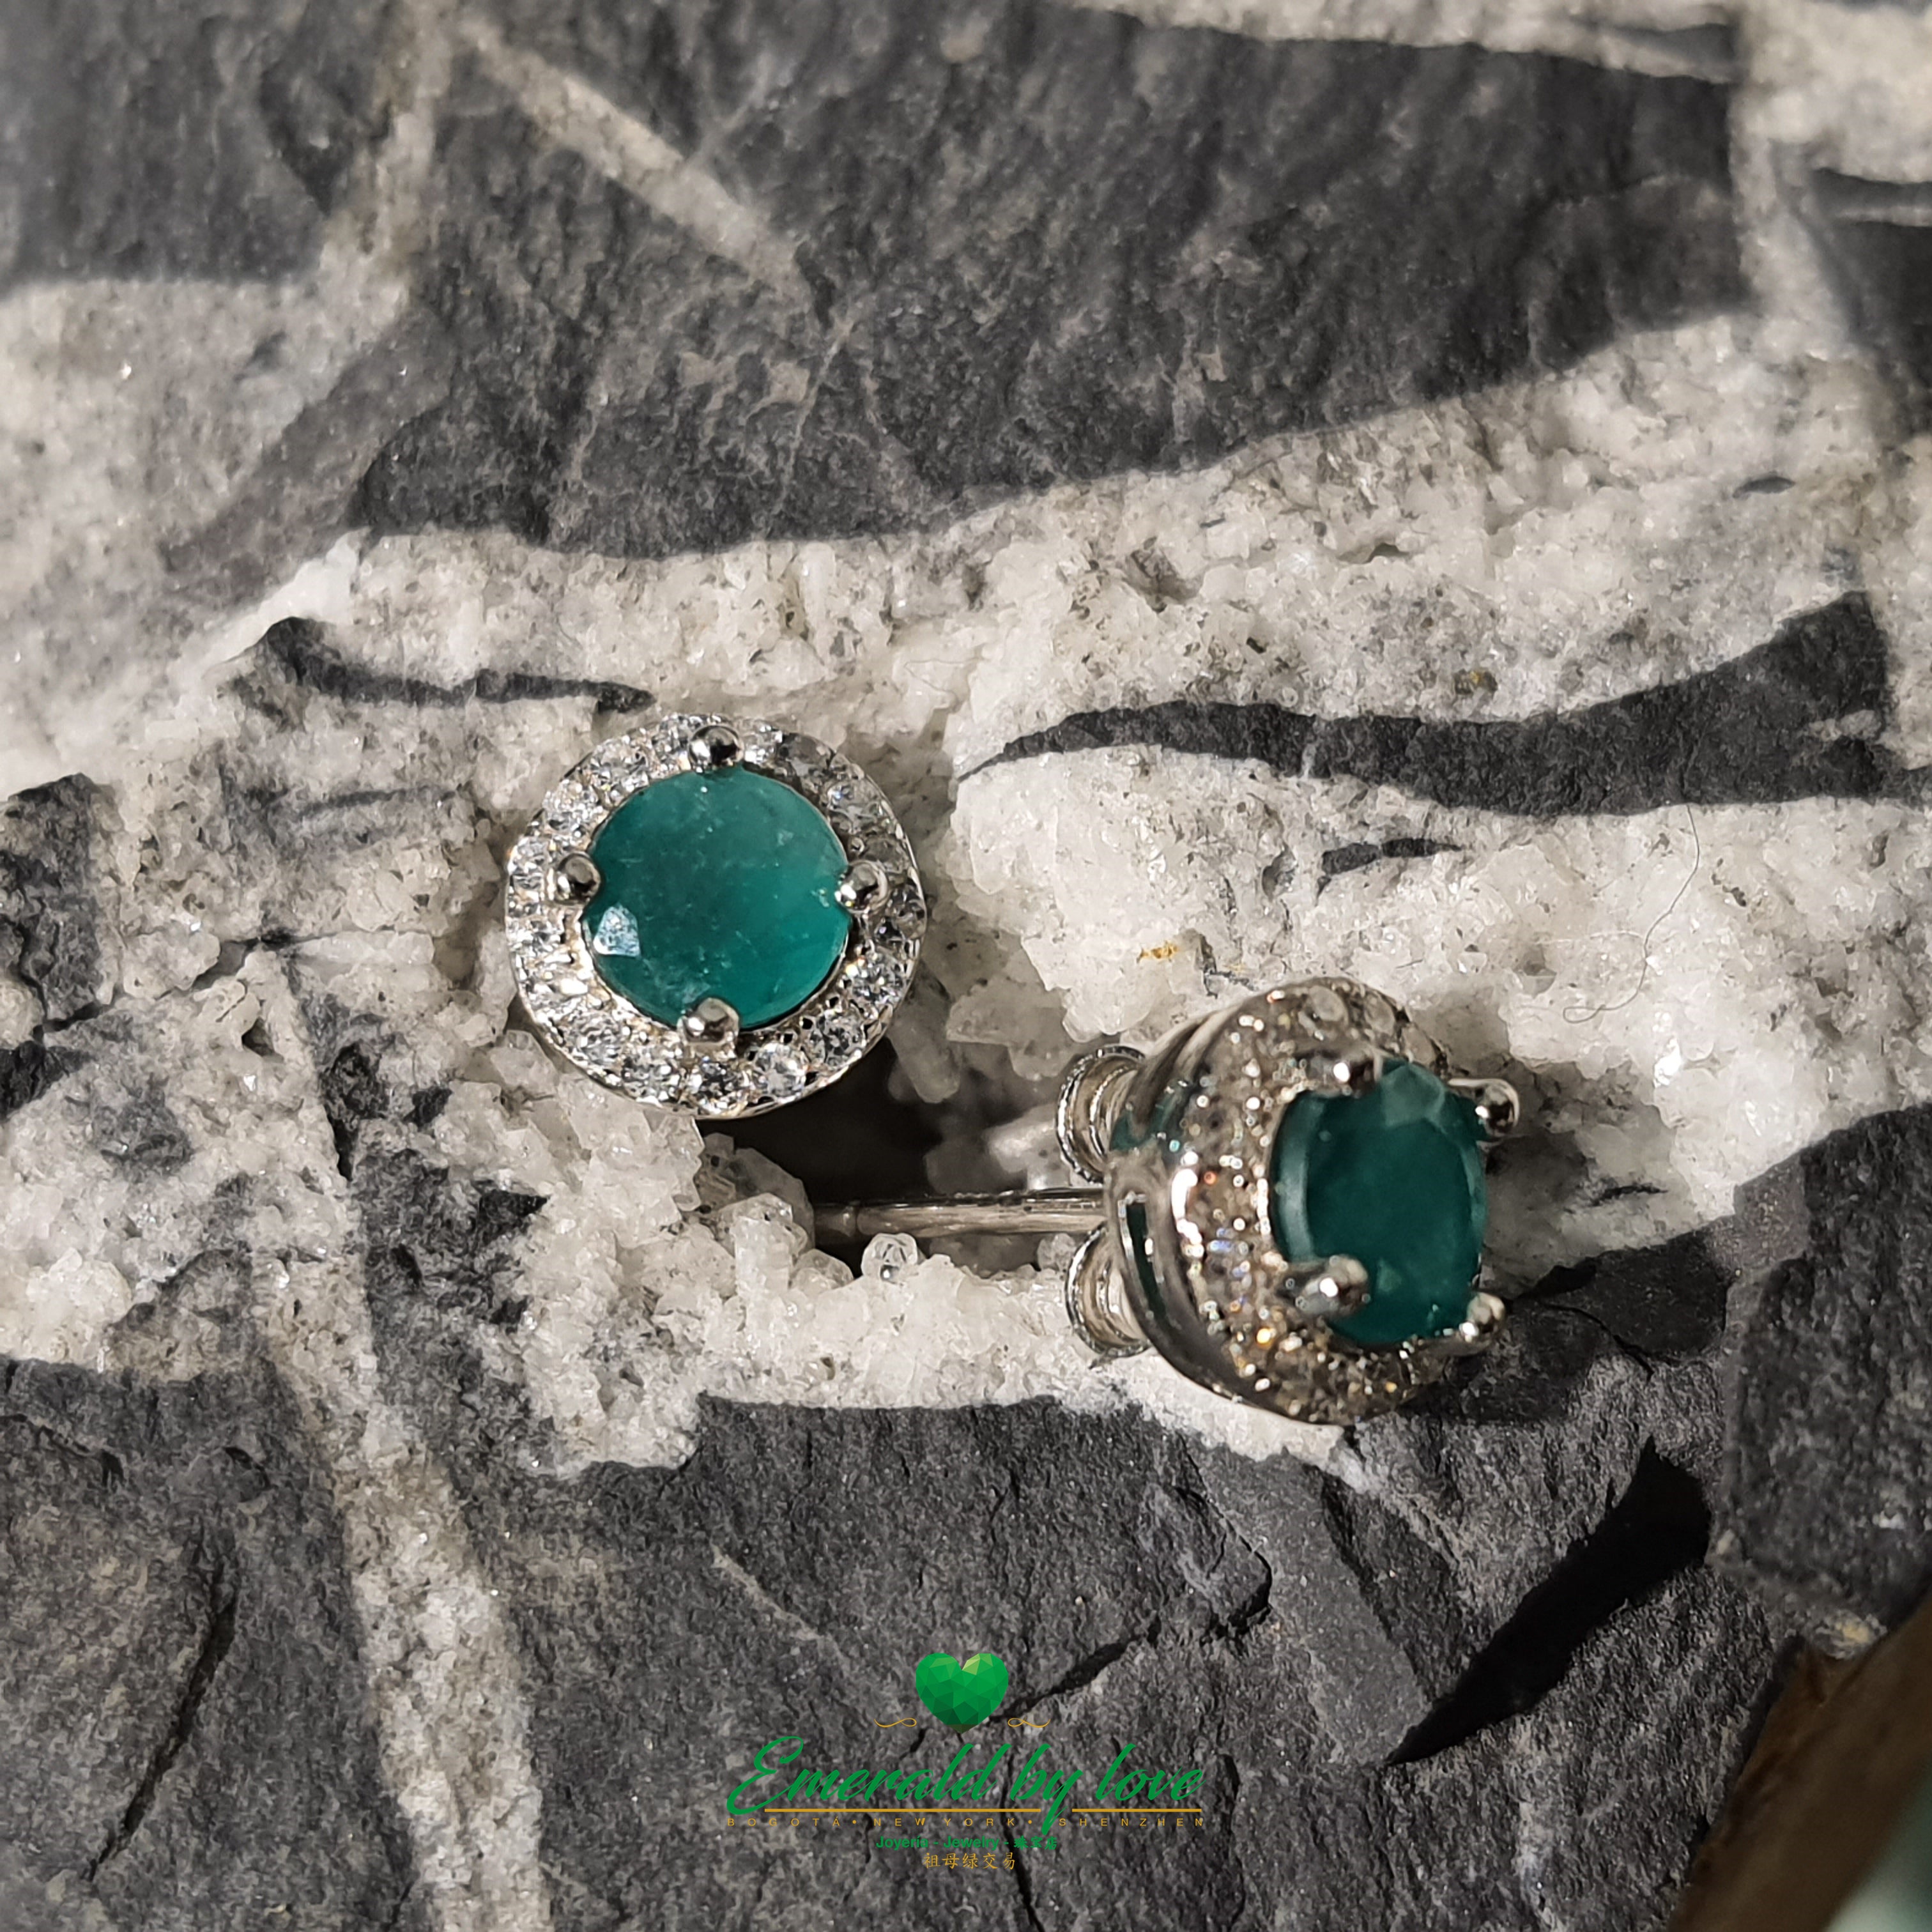 Elegant Round Sterling Silver Earrings with Central Emerald of Exceptional Color and Size